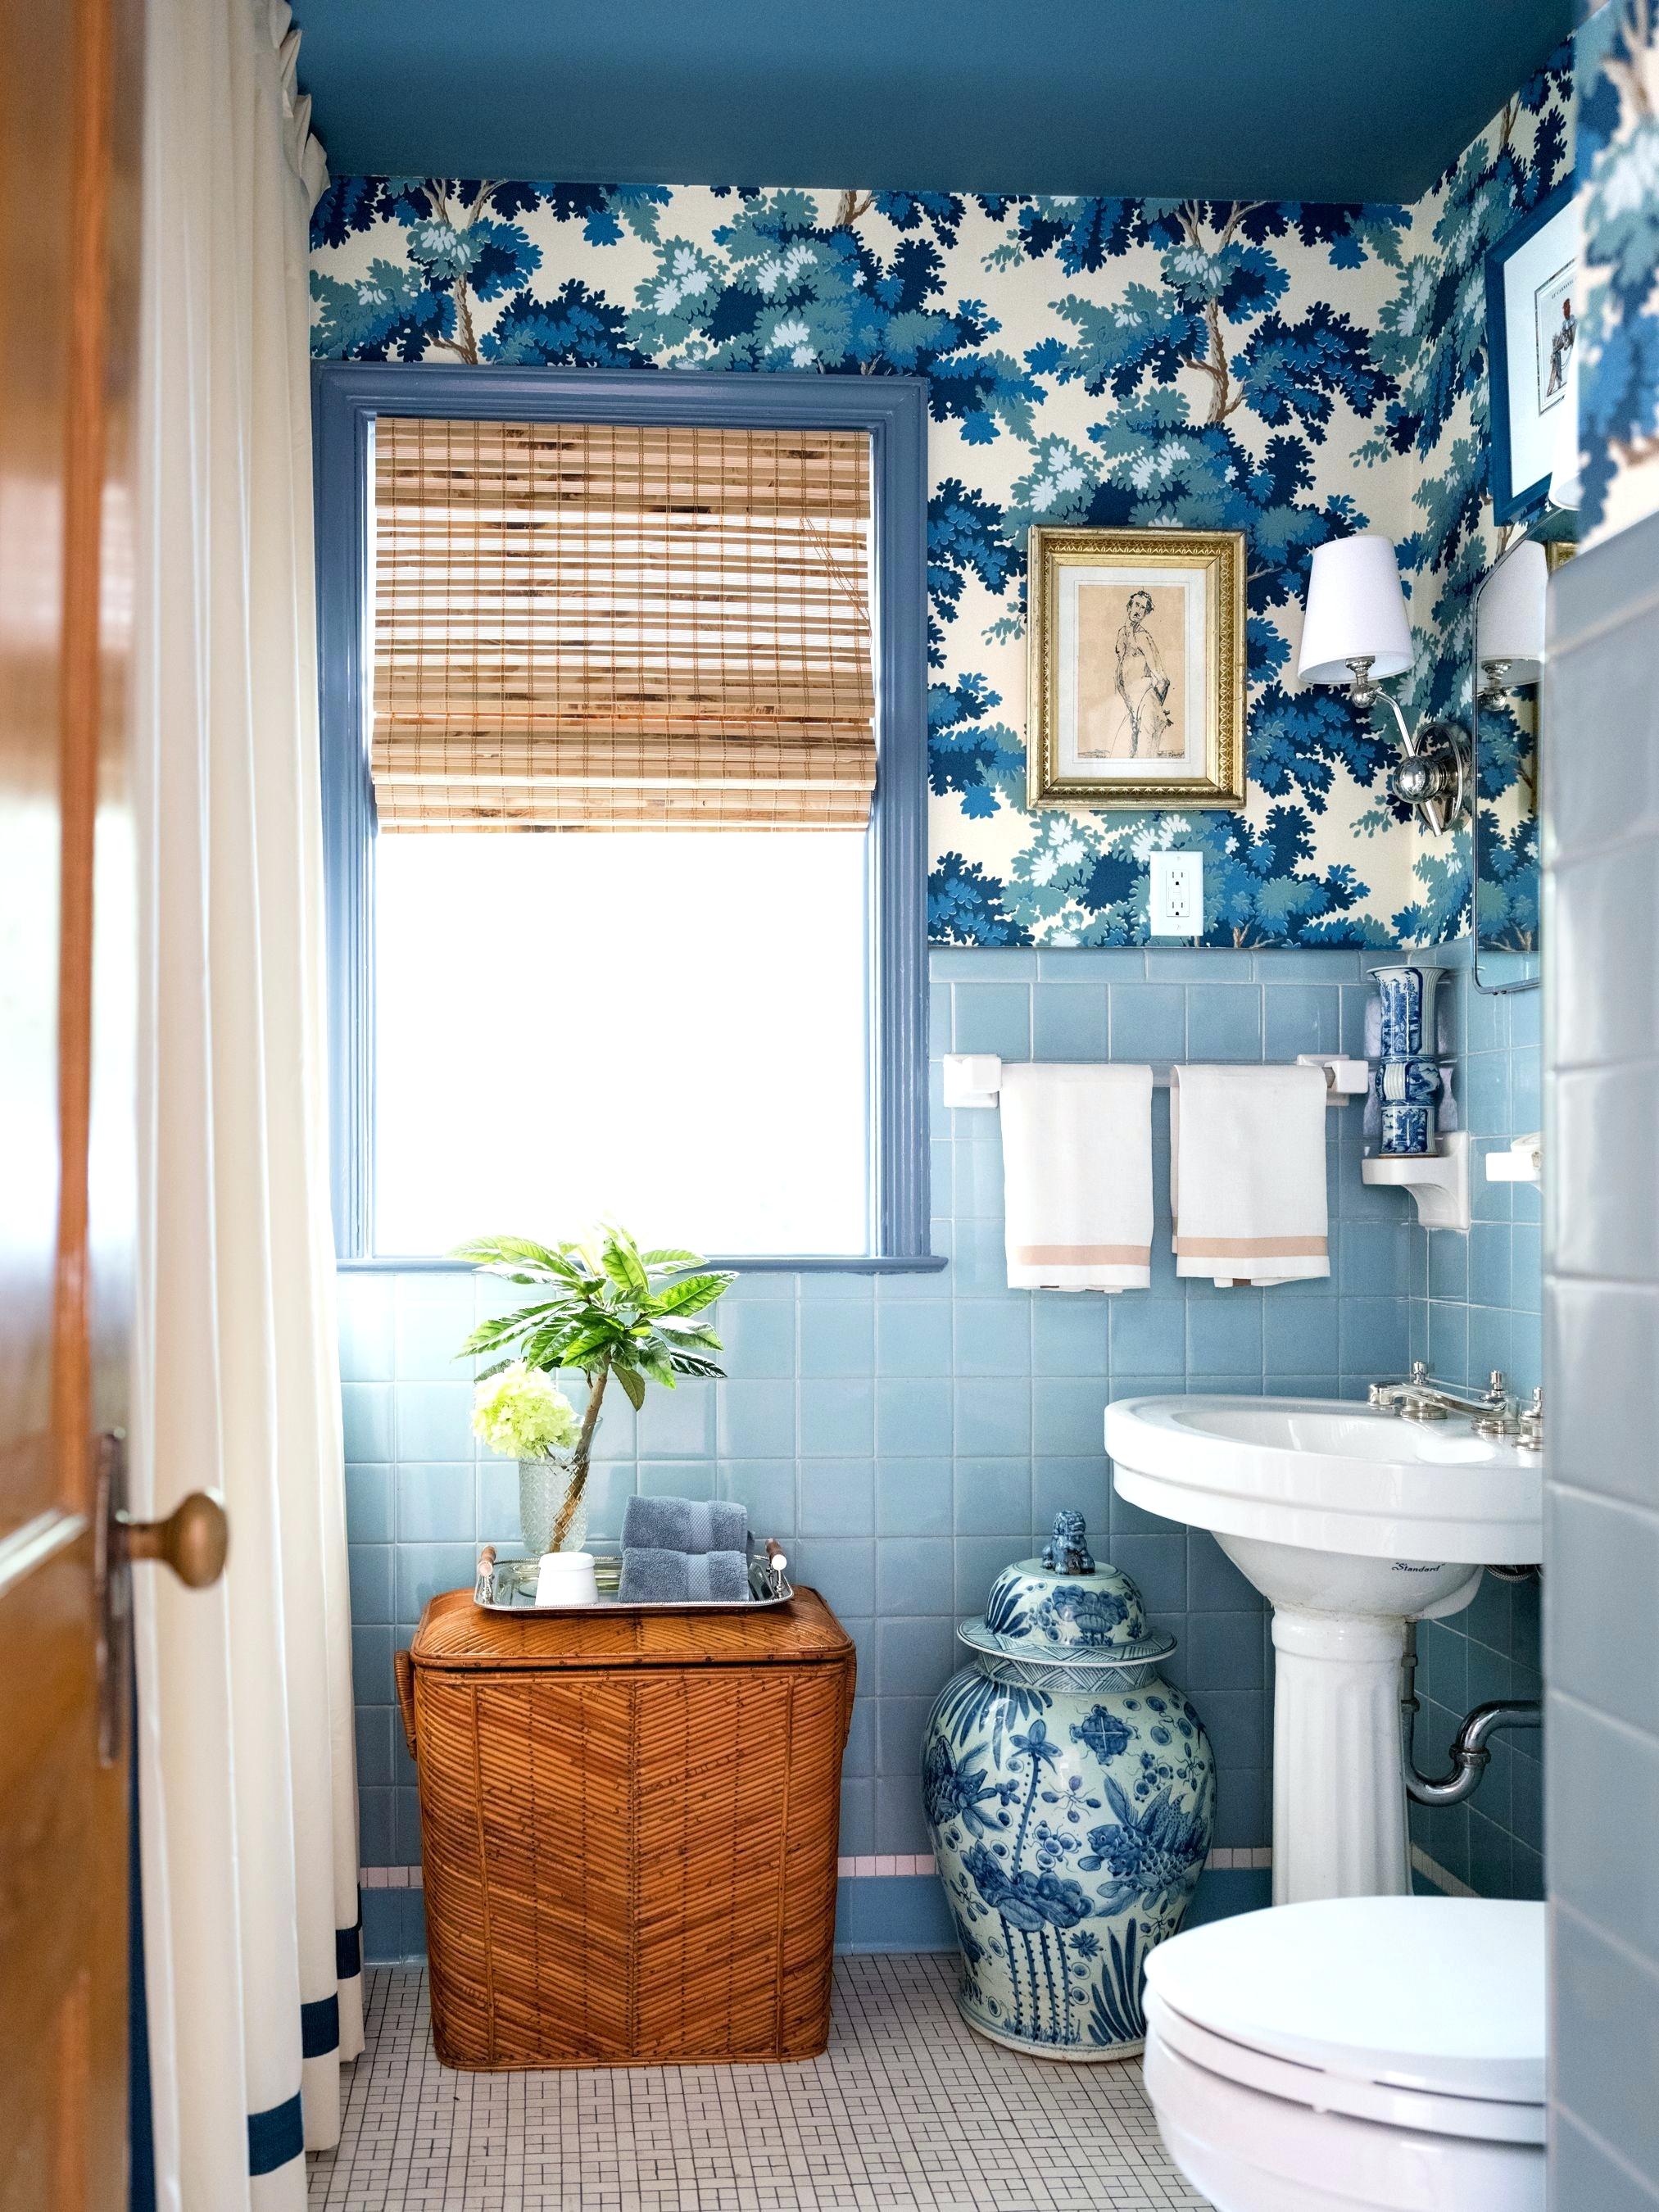 Teal Bathroom Wallpaper Ideas That Will Inspire You - Bathroom Designs For Home Latest - HD Wallpaper 